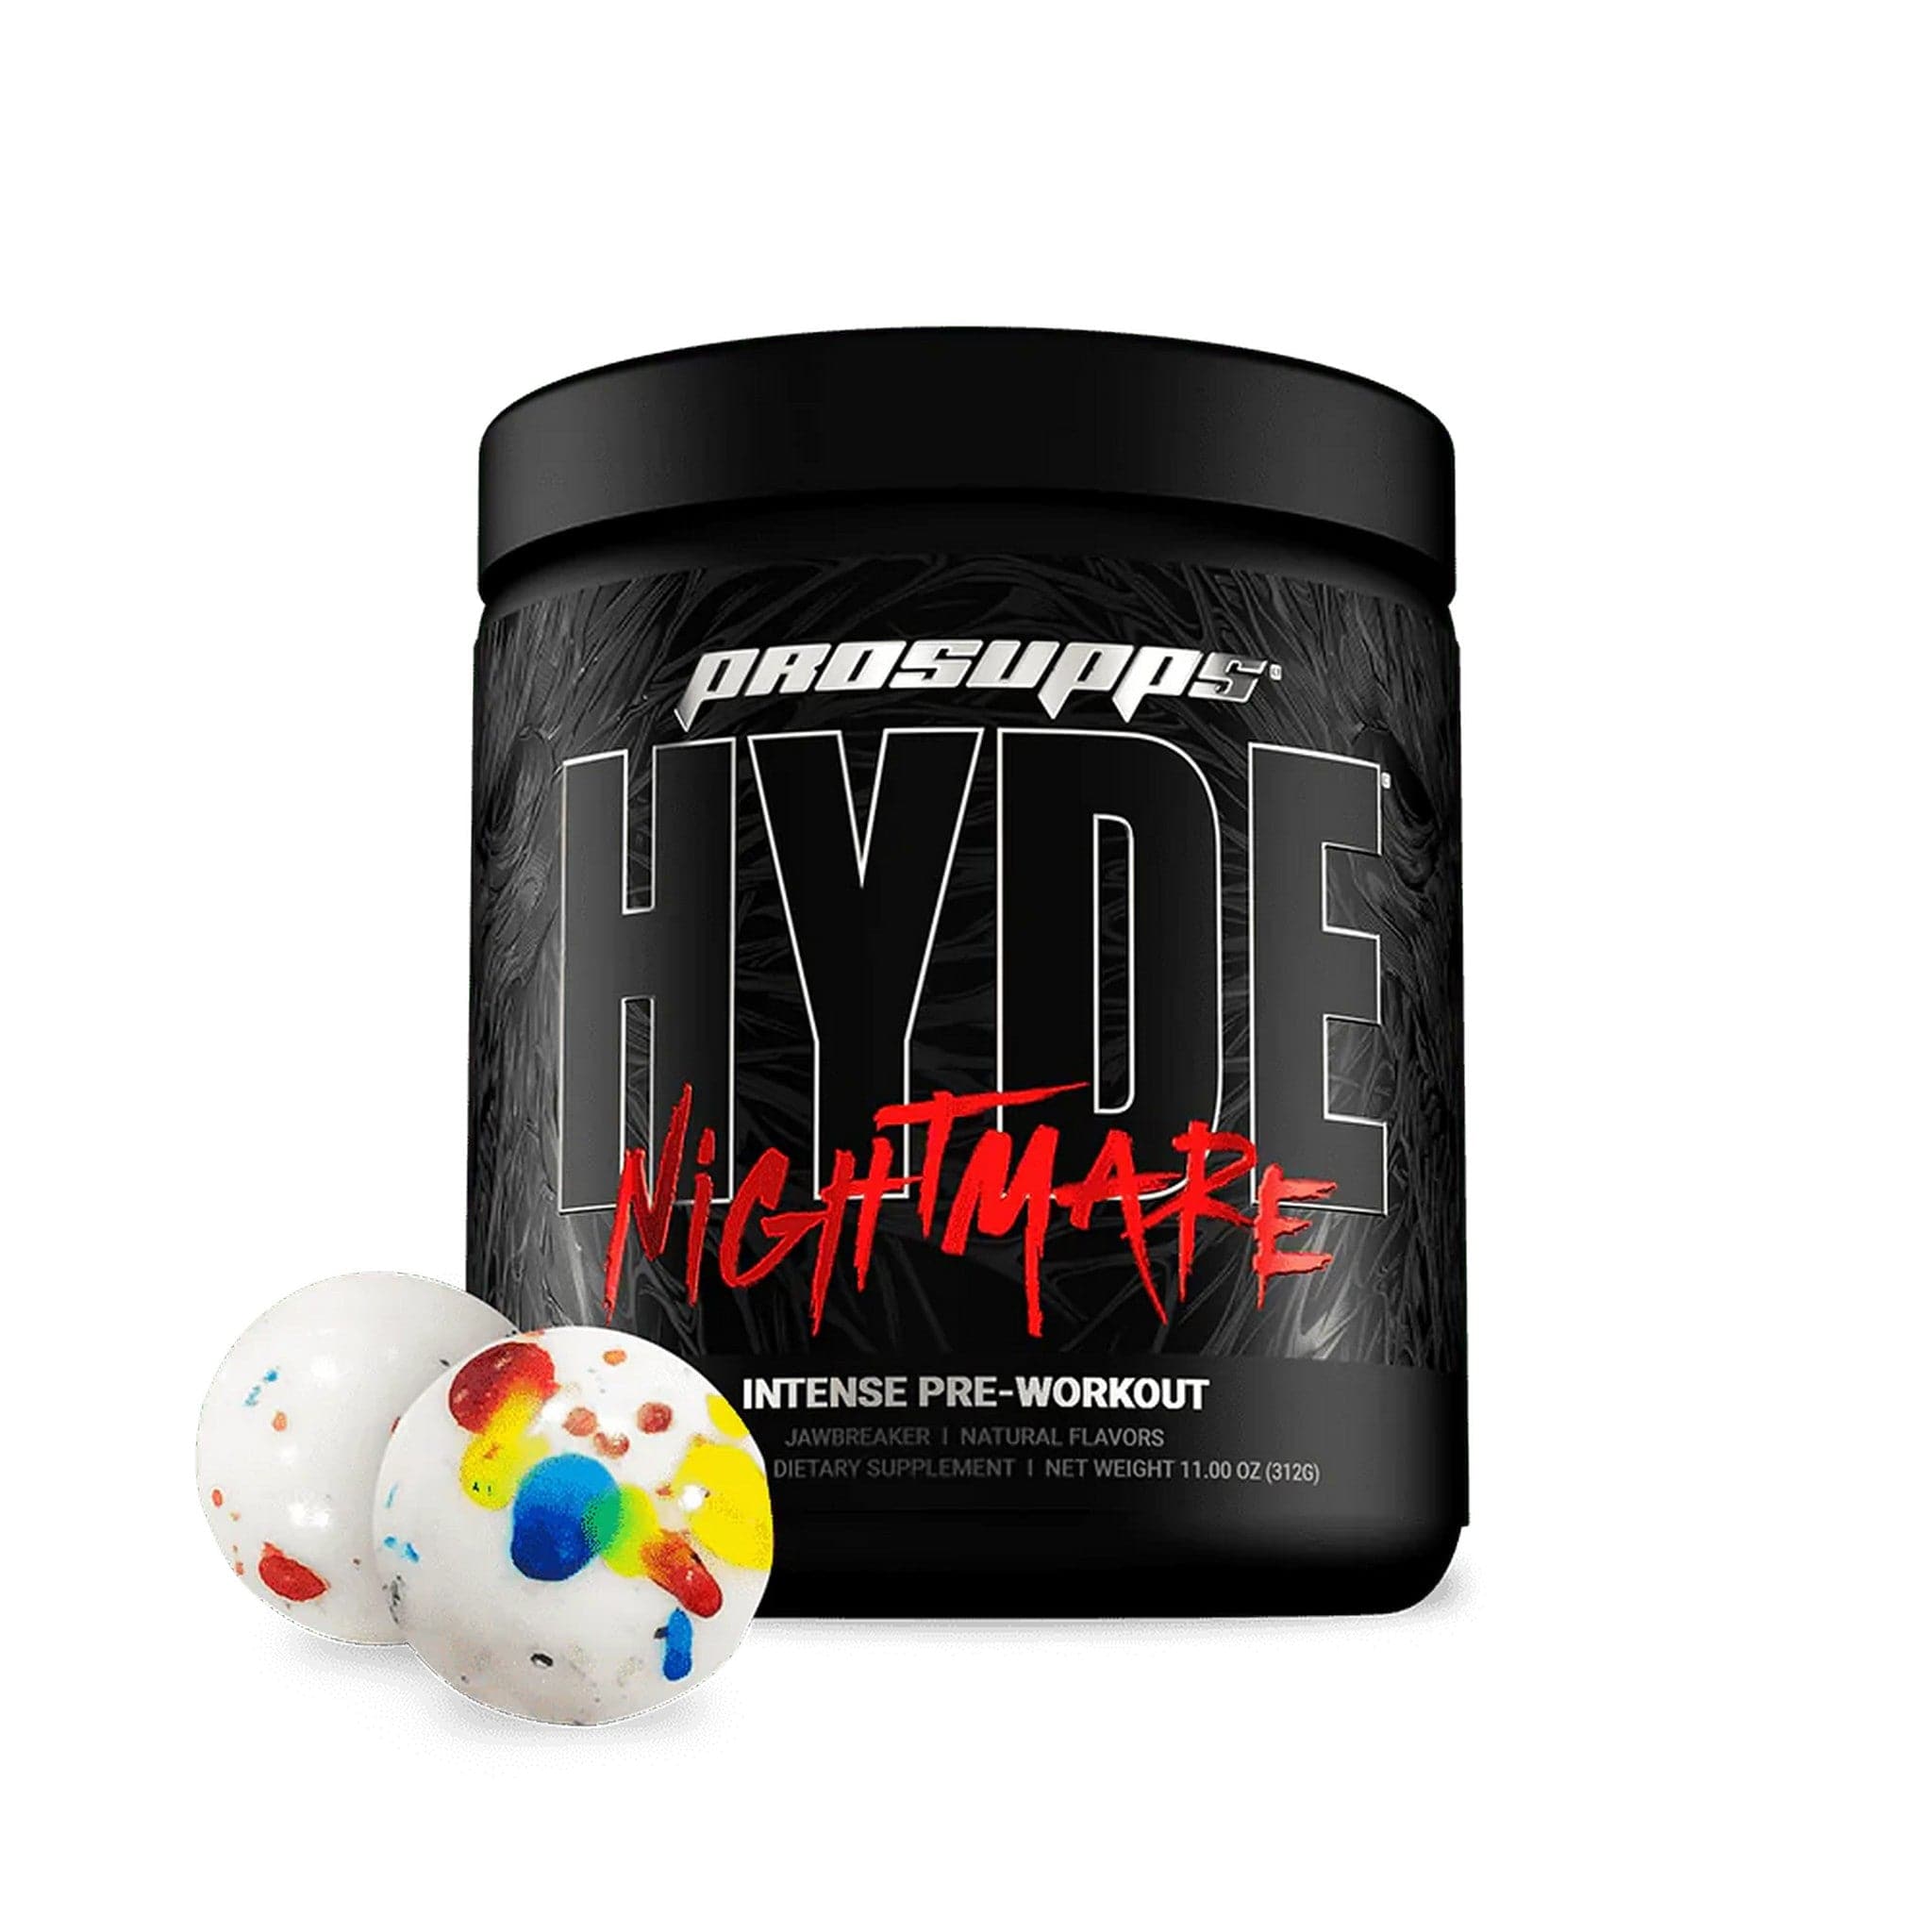 Prosupps Hyde Nightmare 30 portions